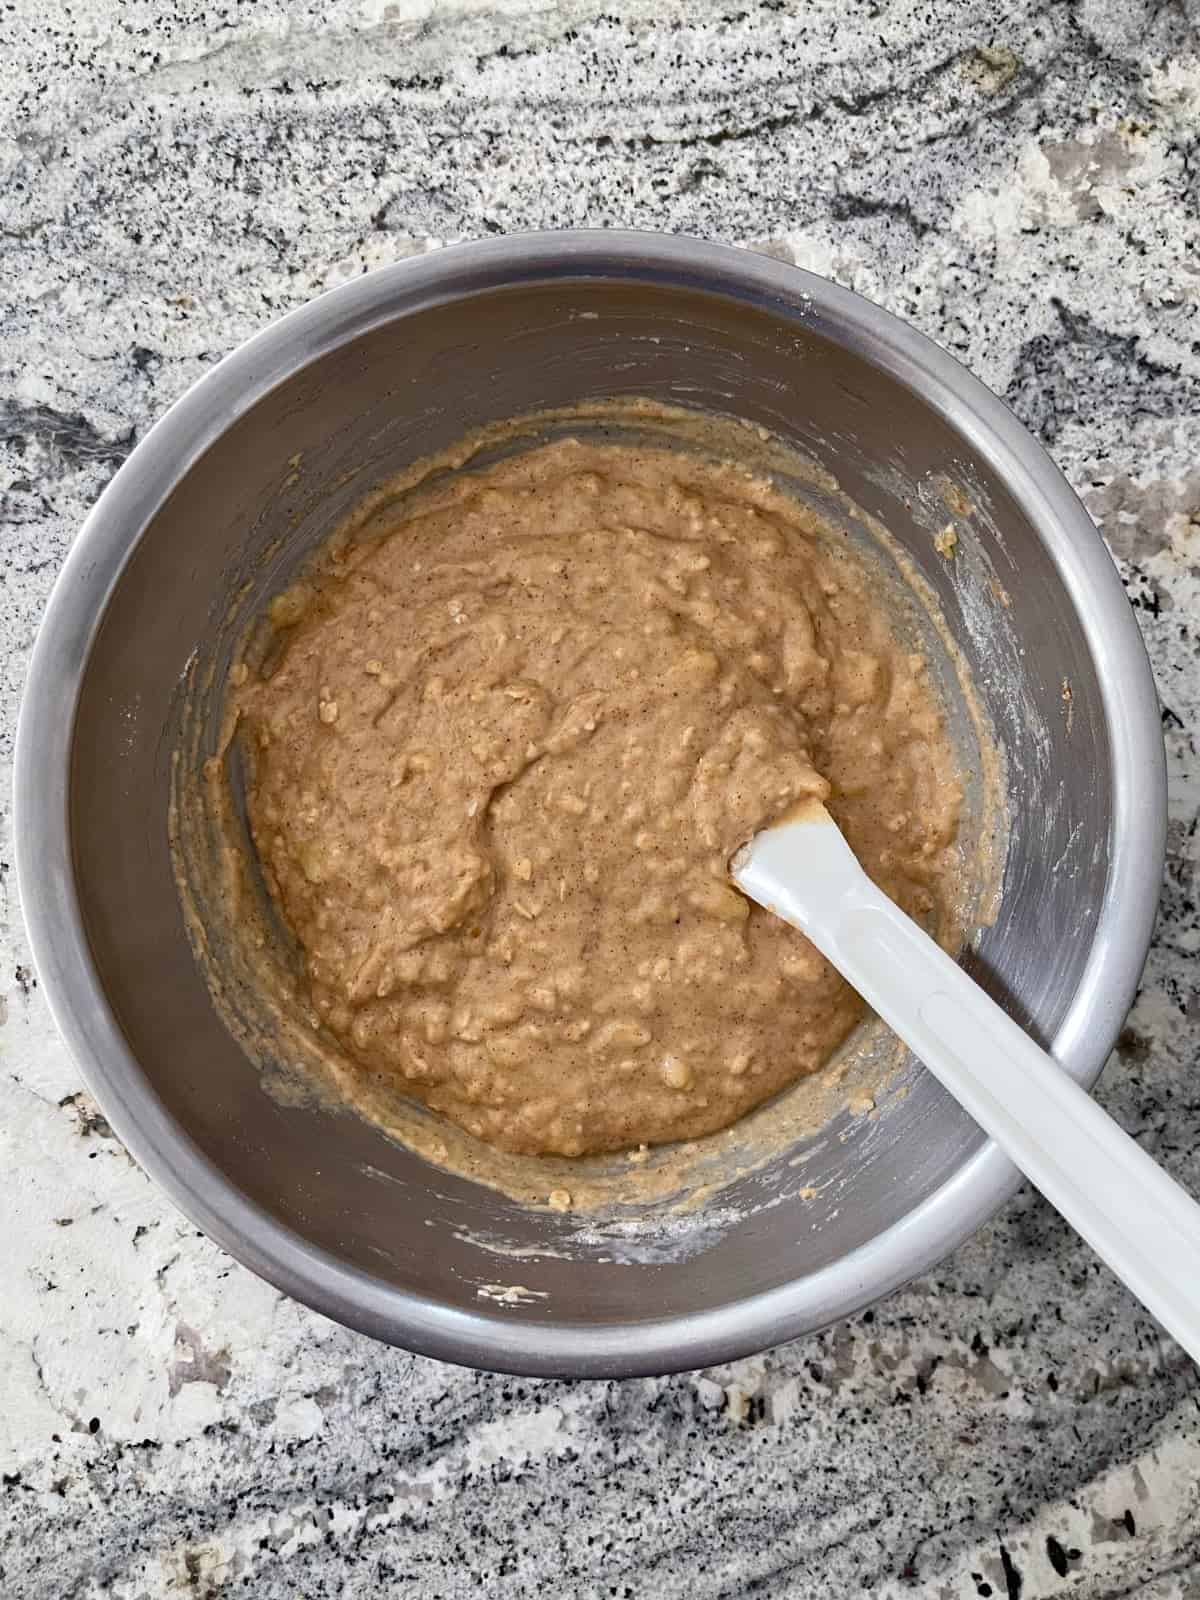 Folding oats and flour into mashed bananas, almond butter and oil in mixing bowl with spatula.